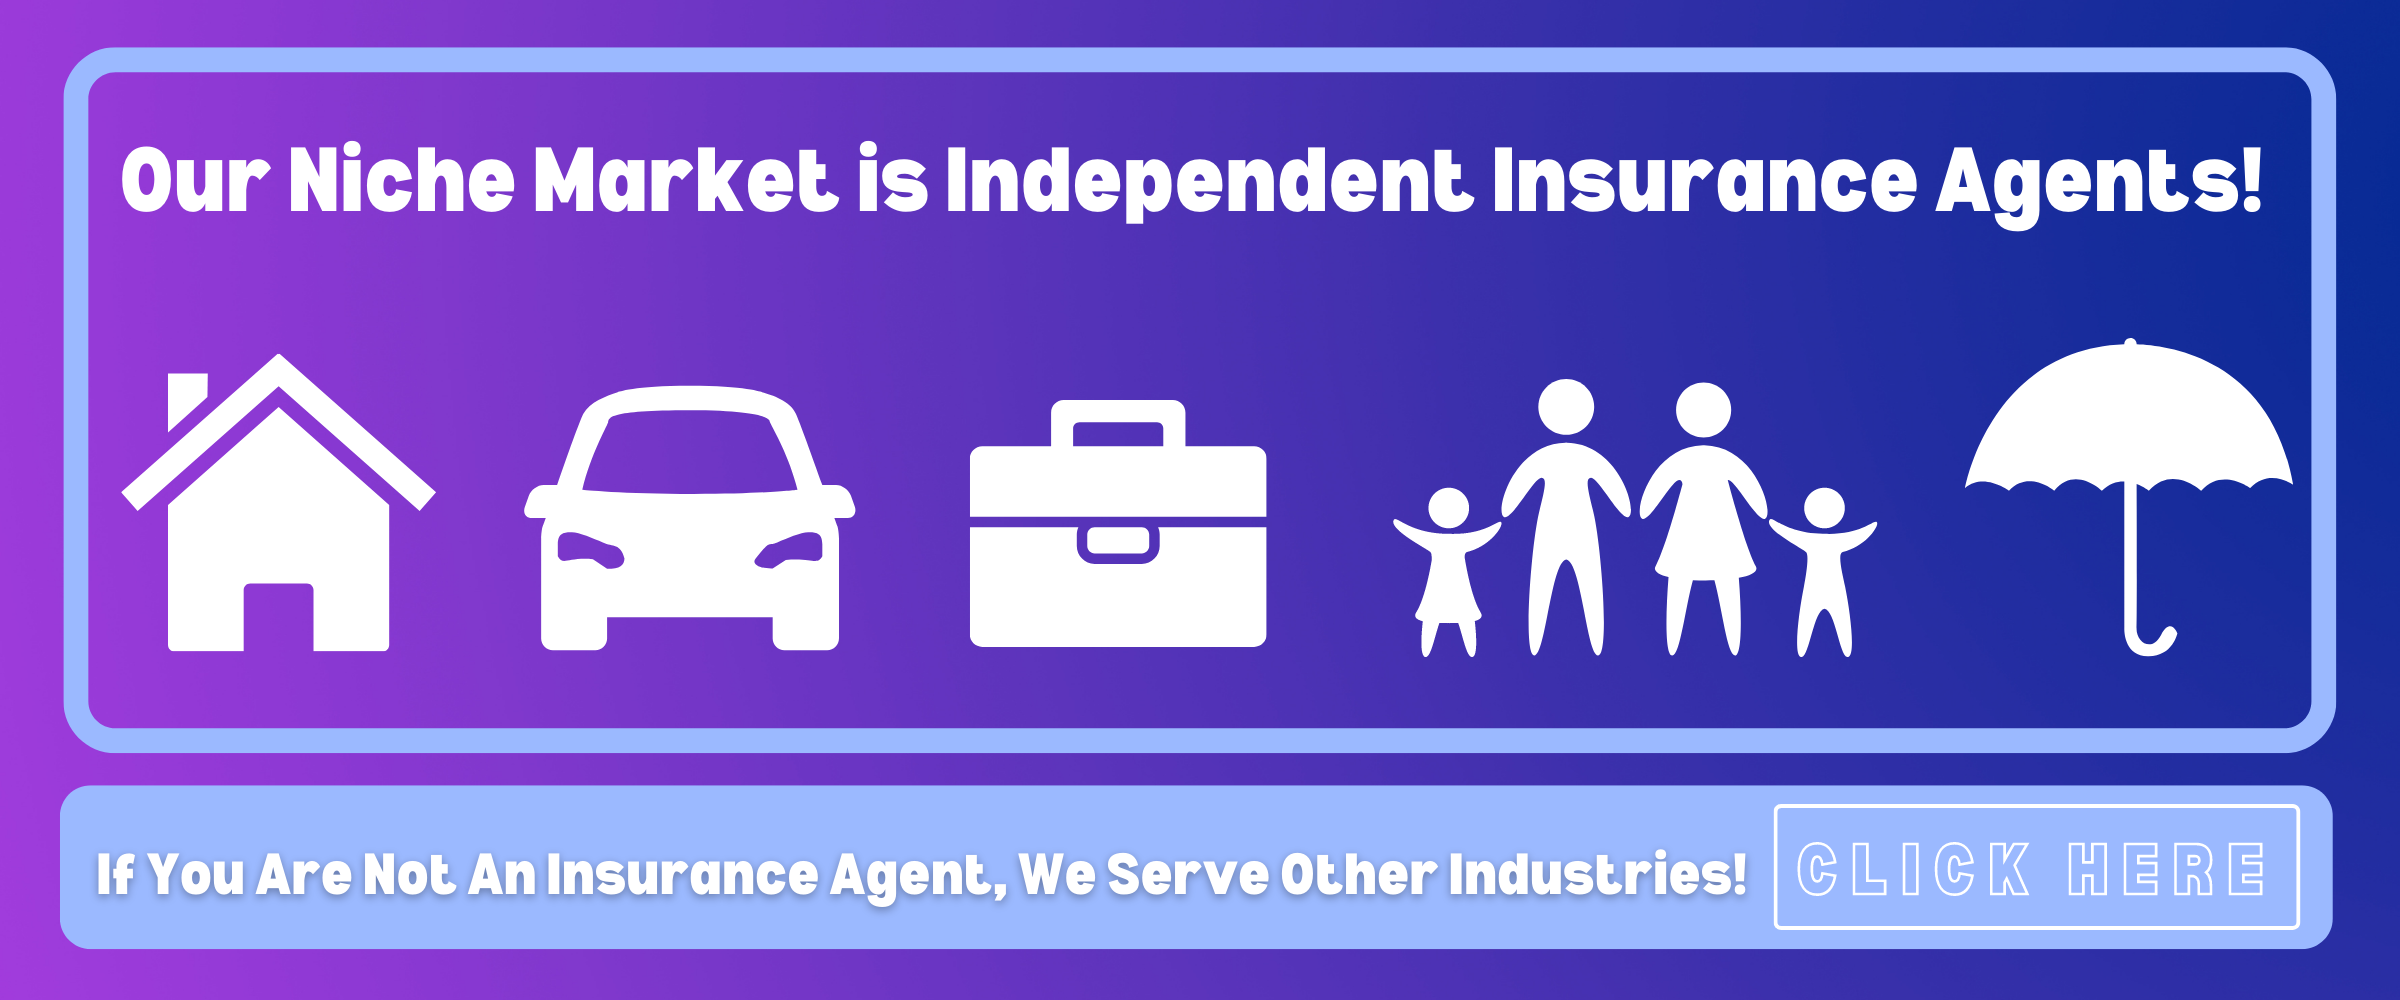 Independent Insurance Agencies Are Our Niche Market!